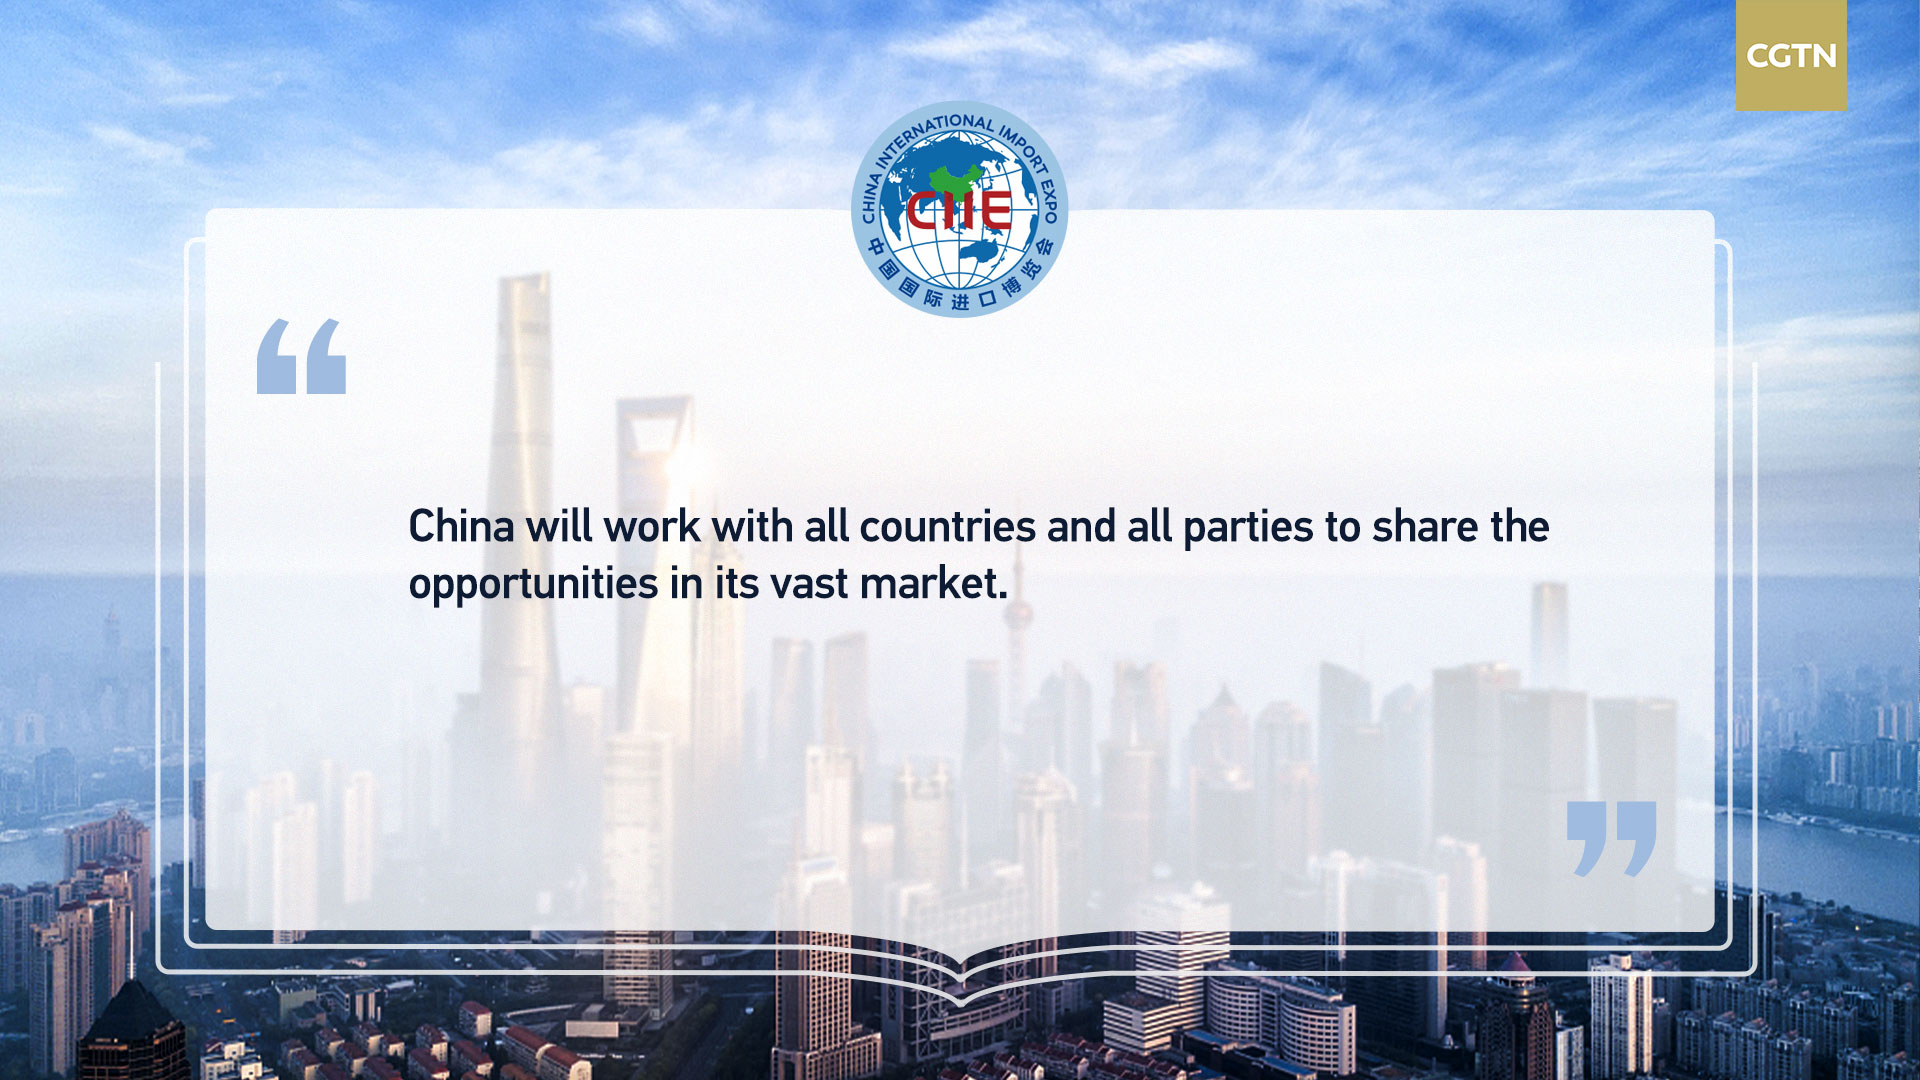 Key quotes from Xi Jinping's speech at 5th CIIE opening ceremony